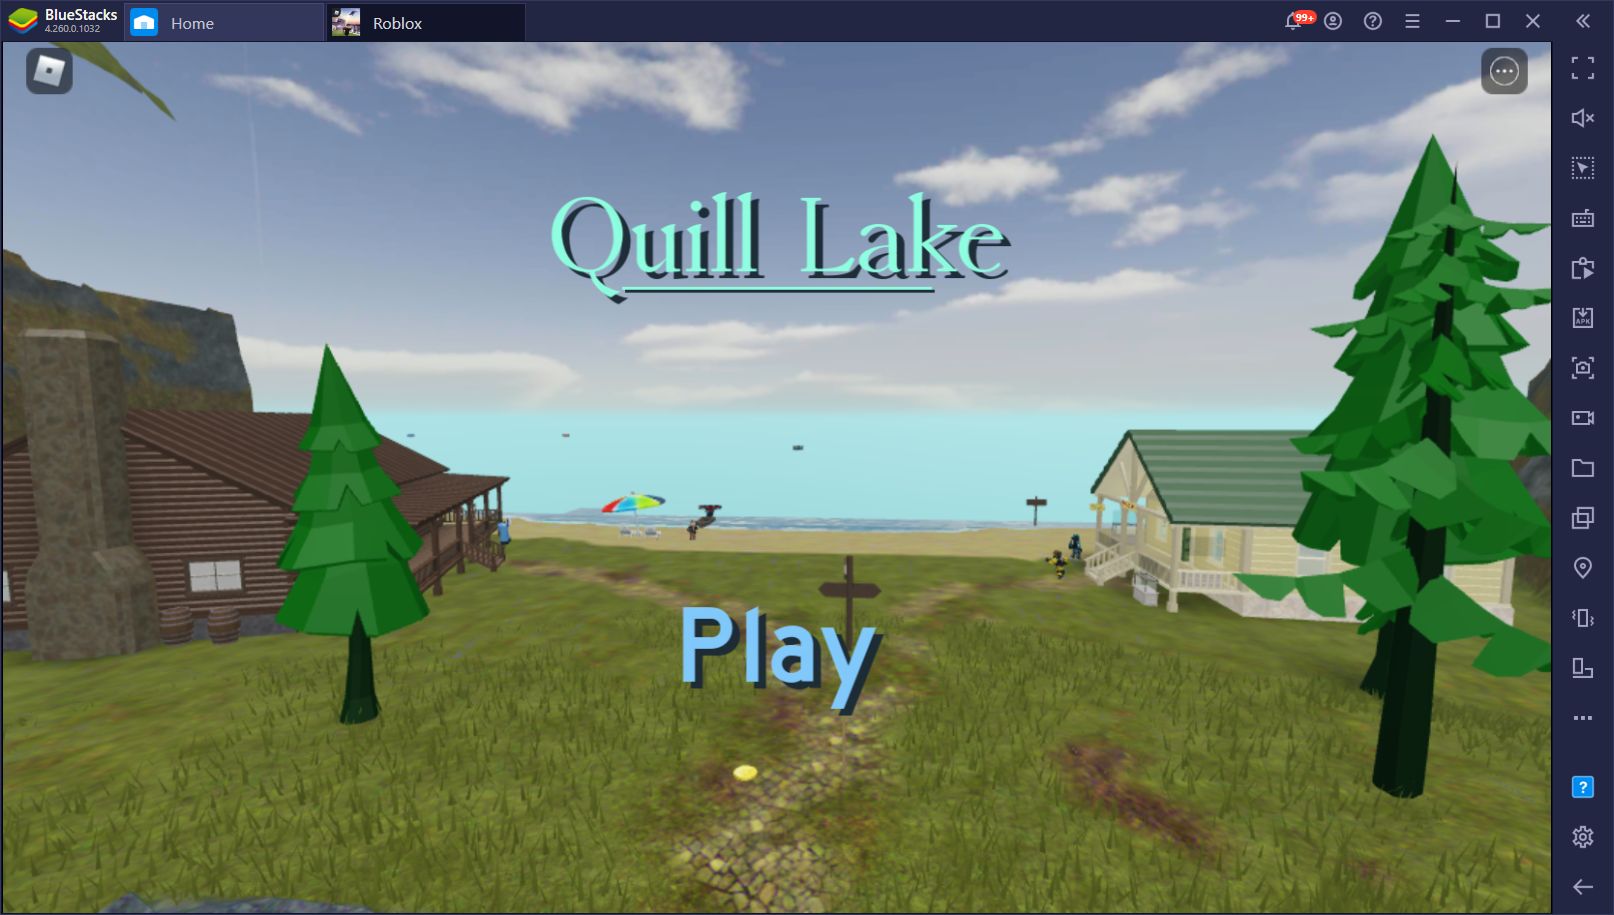 The Best Roblox Games To Play In 2021 Bluestacks - roblox scuba diving at quill lake pirate hat